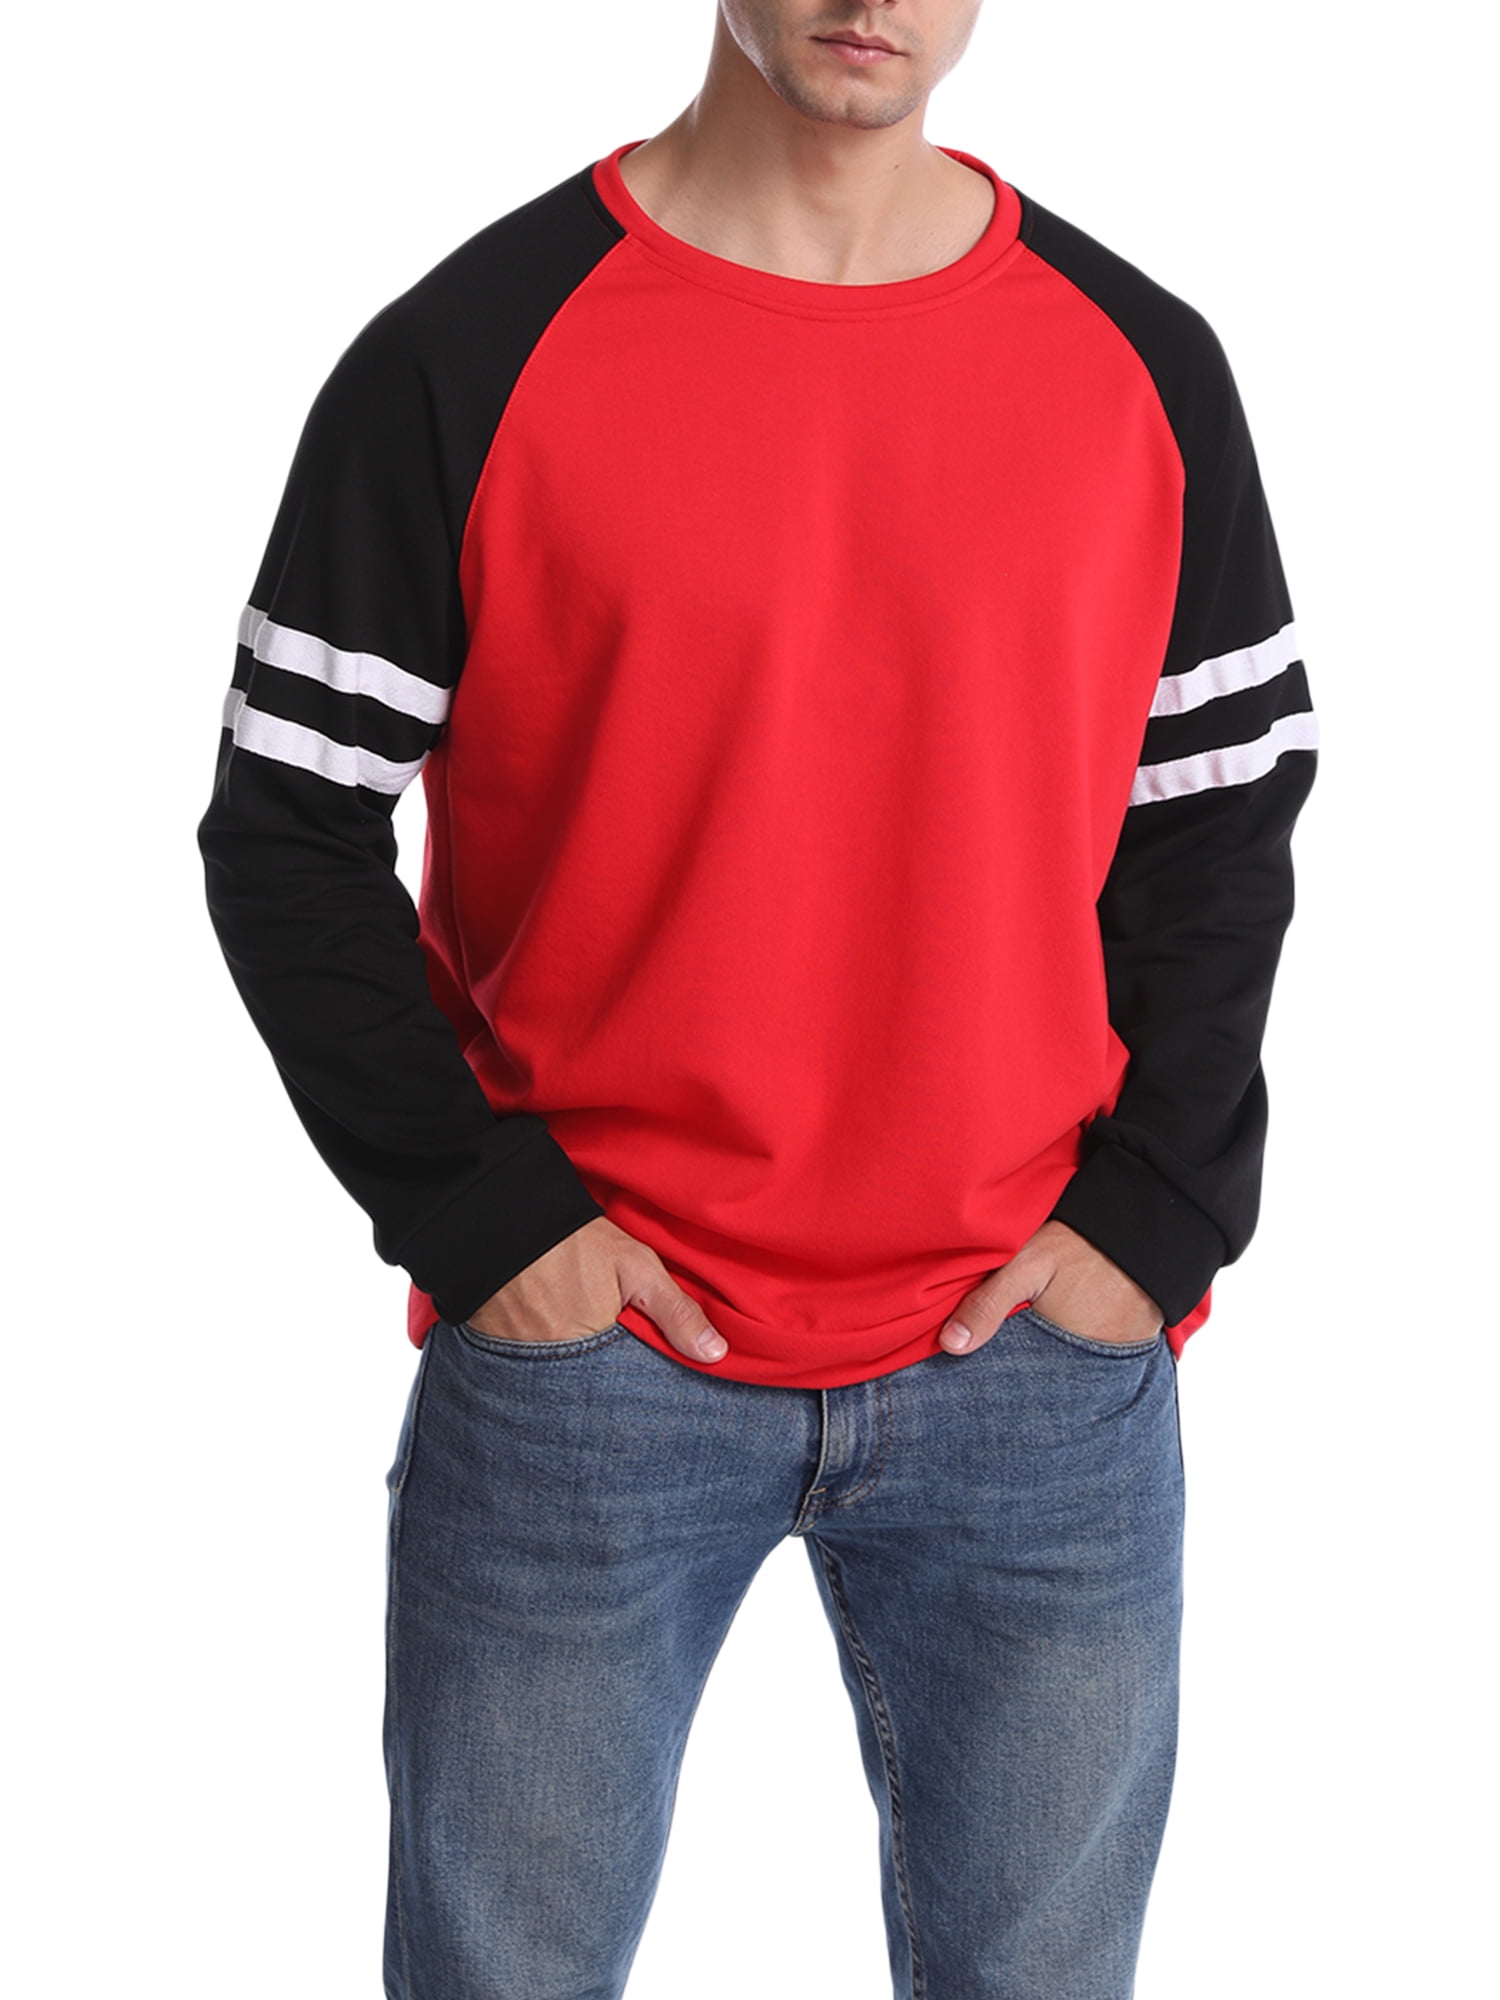 Mens Long Sleeve Cotton Blend T-shirt Crew Neck Casual Sweat Top Tokyo Laundry